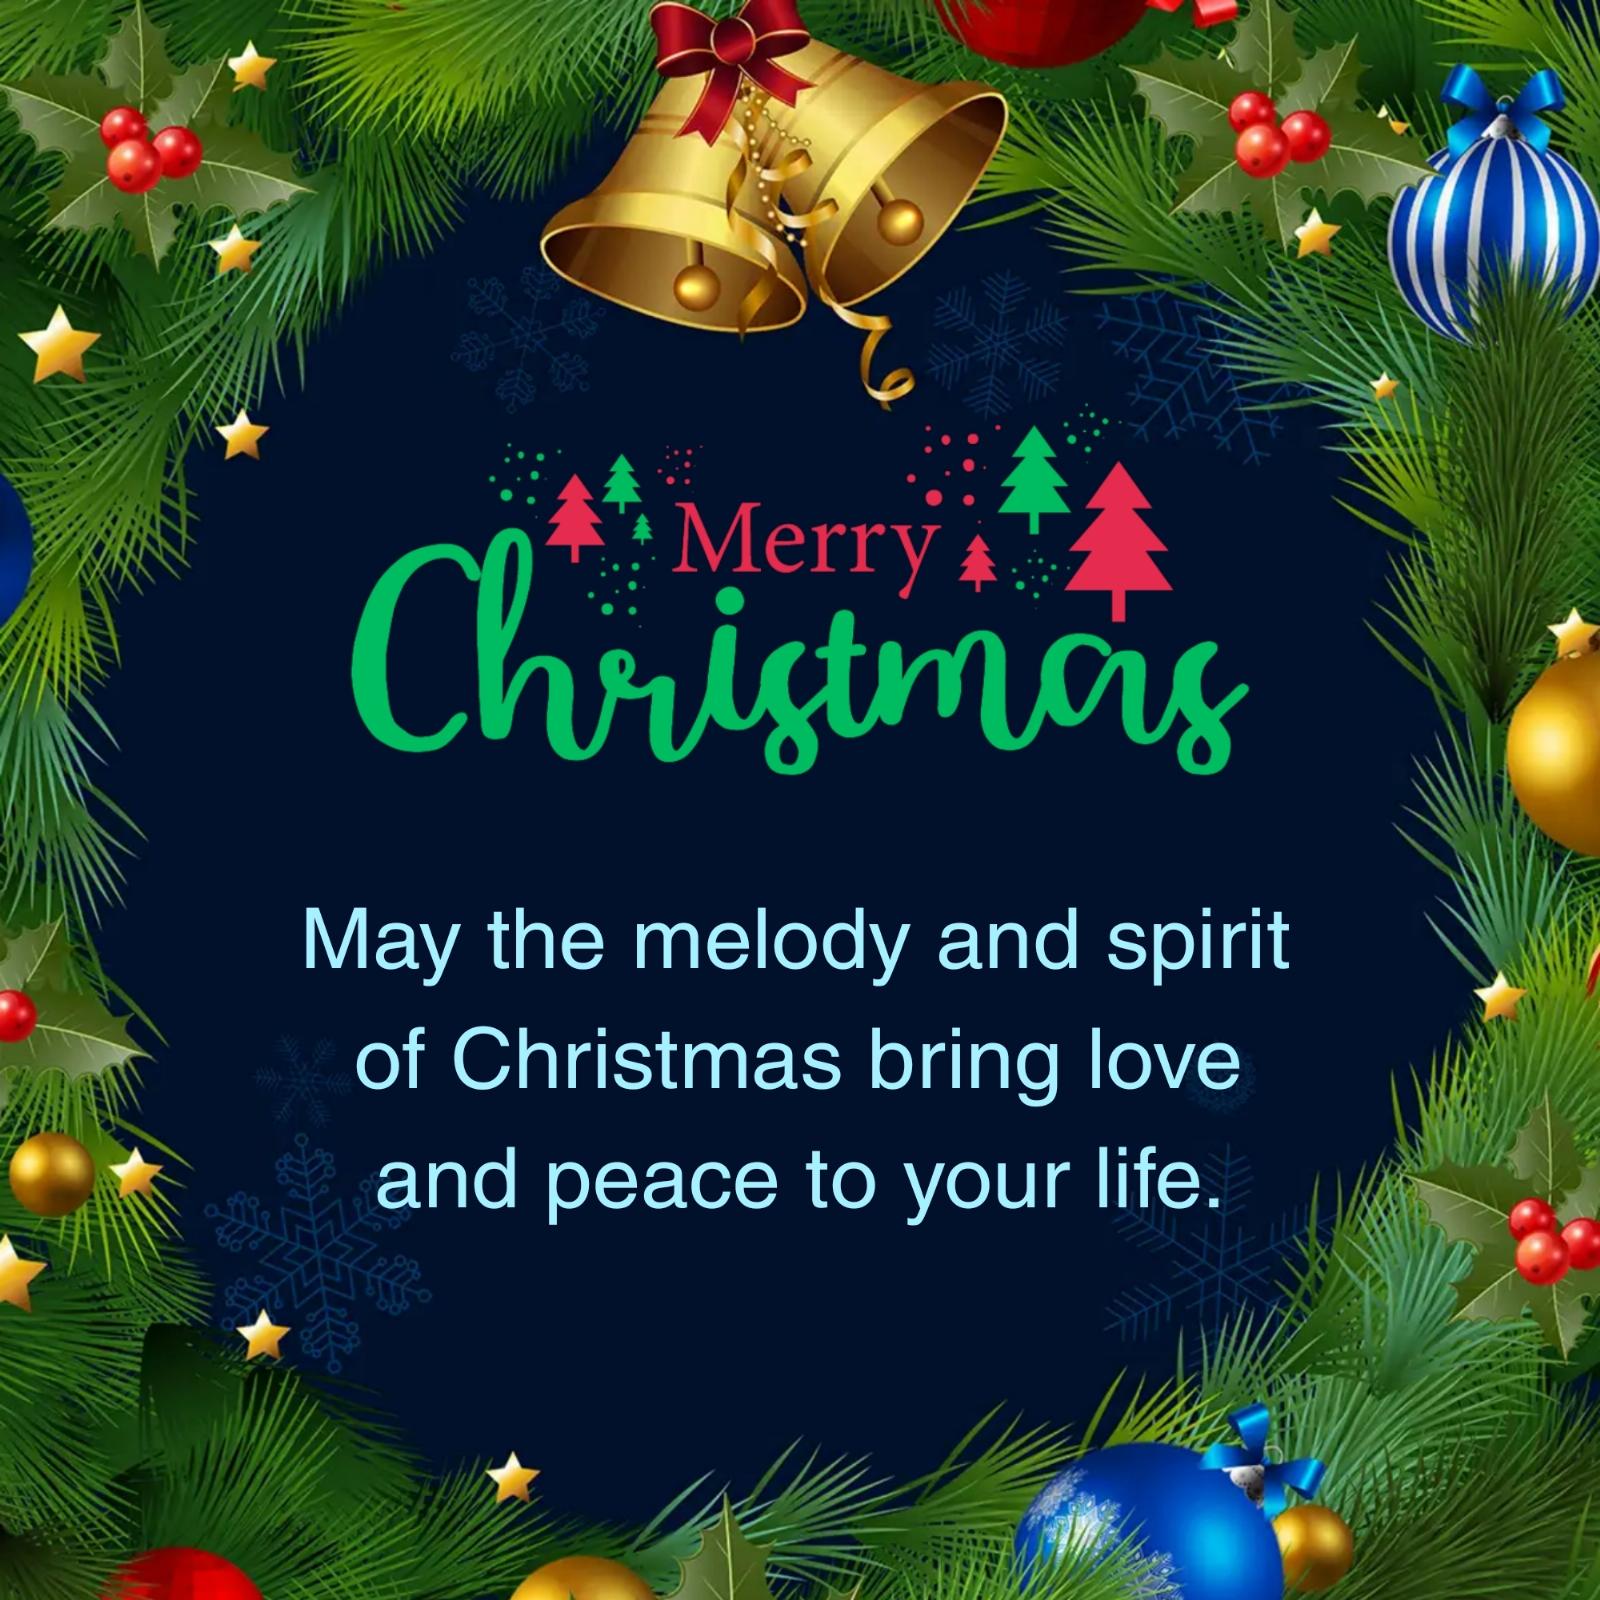 May the melody and spirit of Christmas bring love and peace